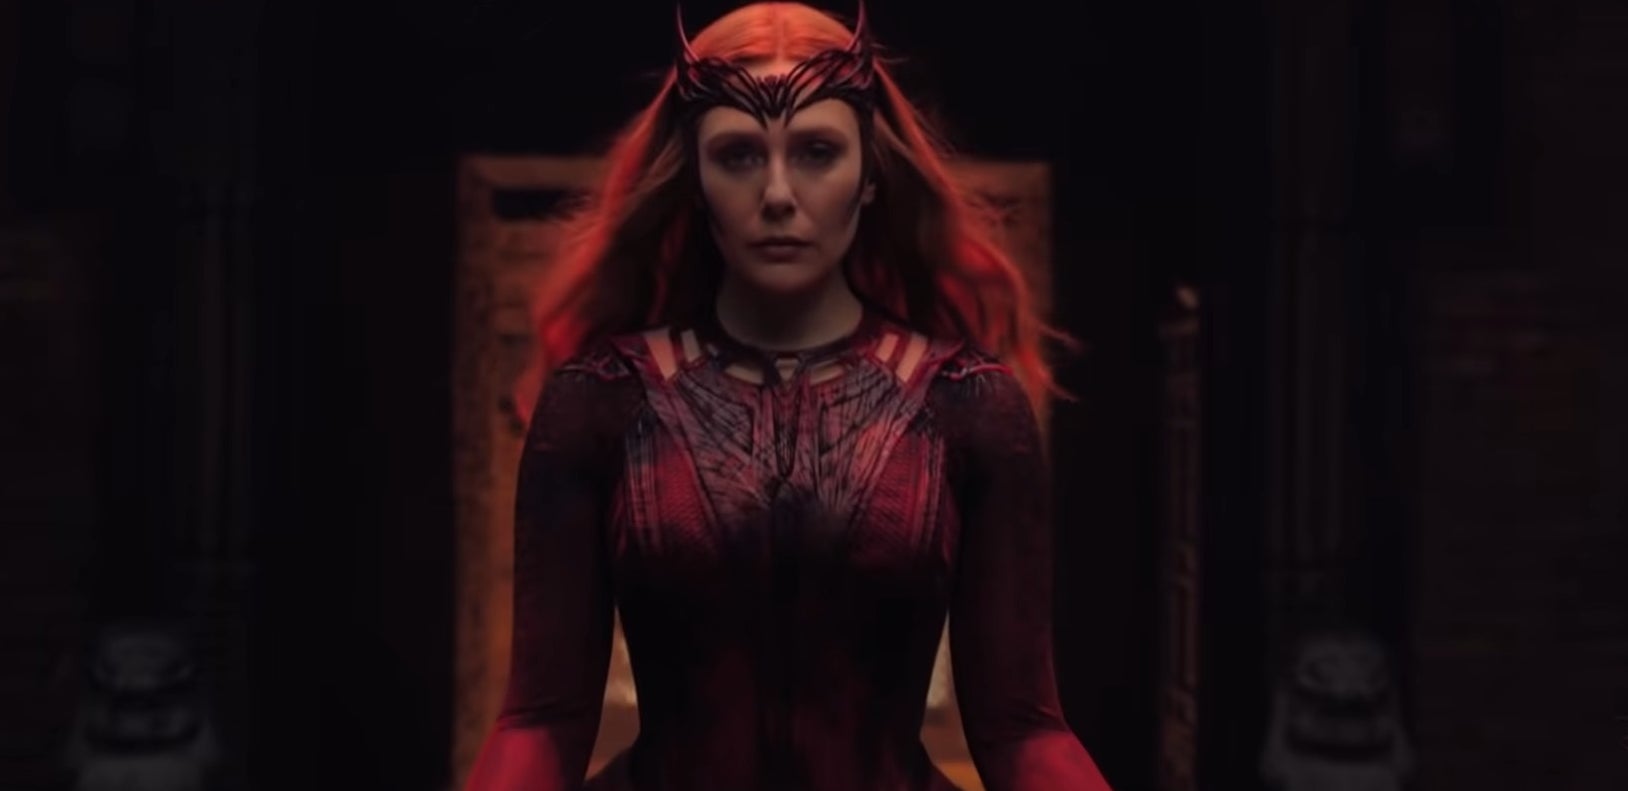 Wanda meditating in &quot;Doctor Strange in the Multiverse of Madness&quot;